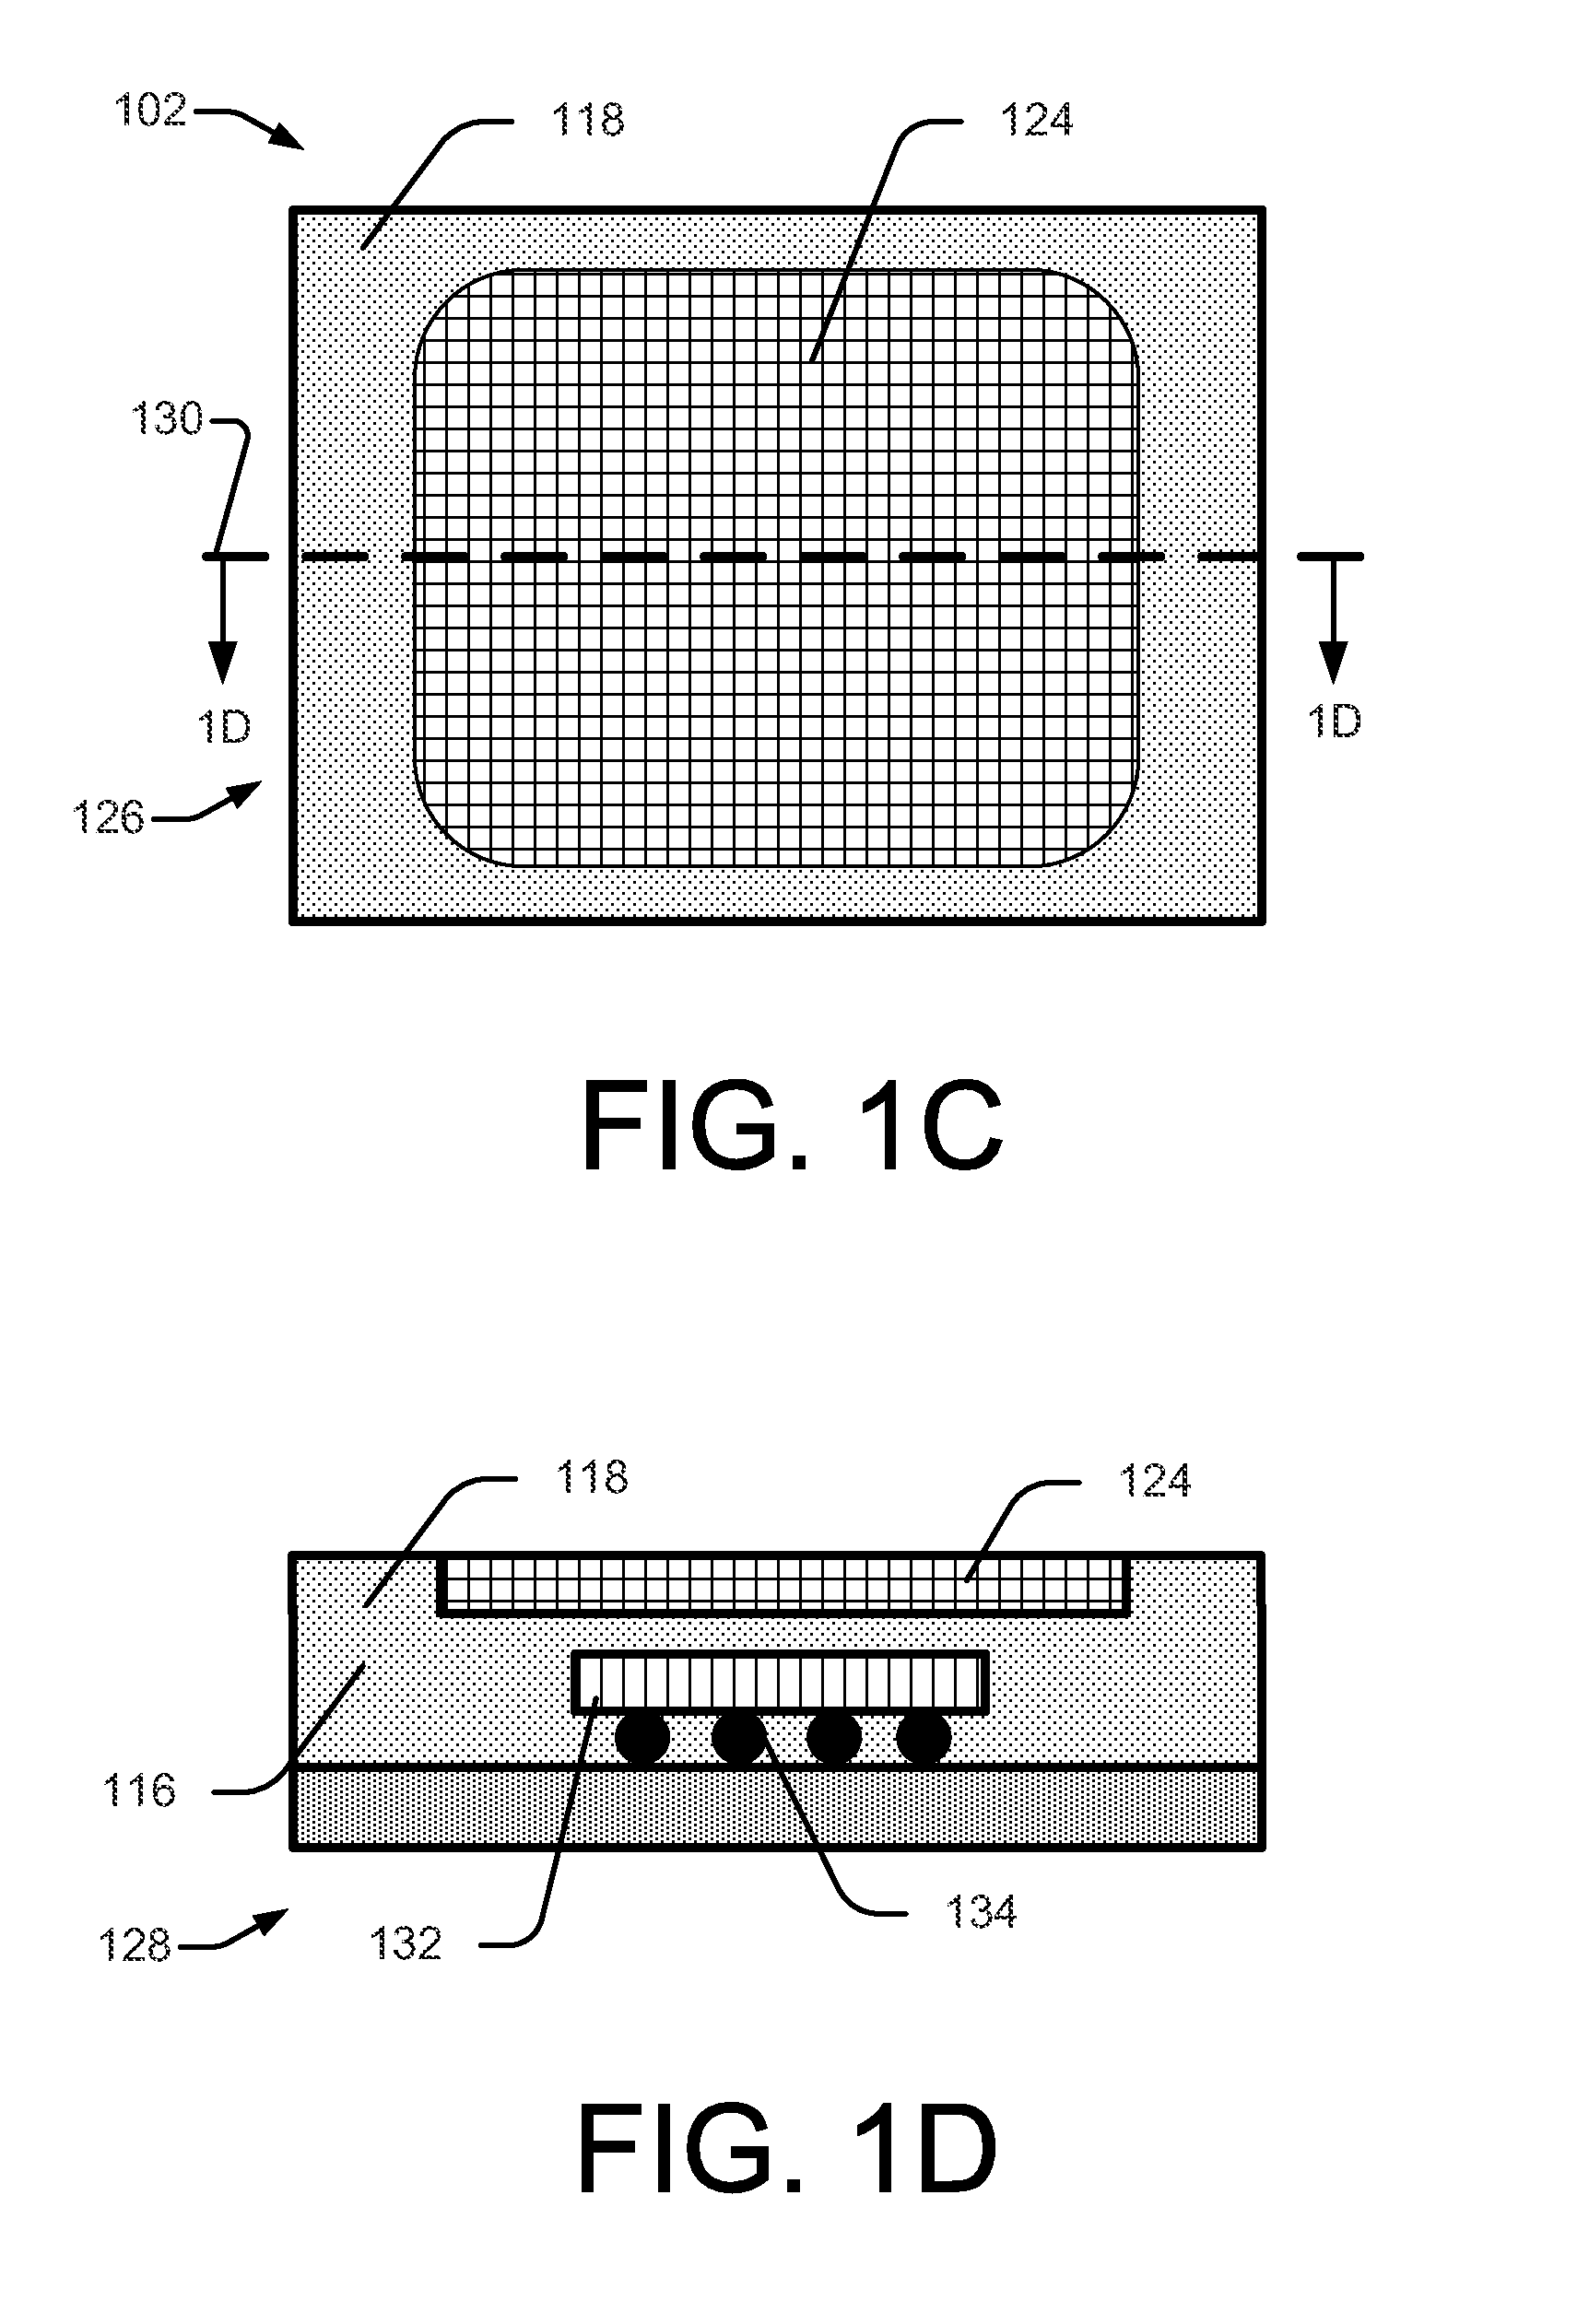 Placing heat sink into packaging by strip formation assembly